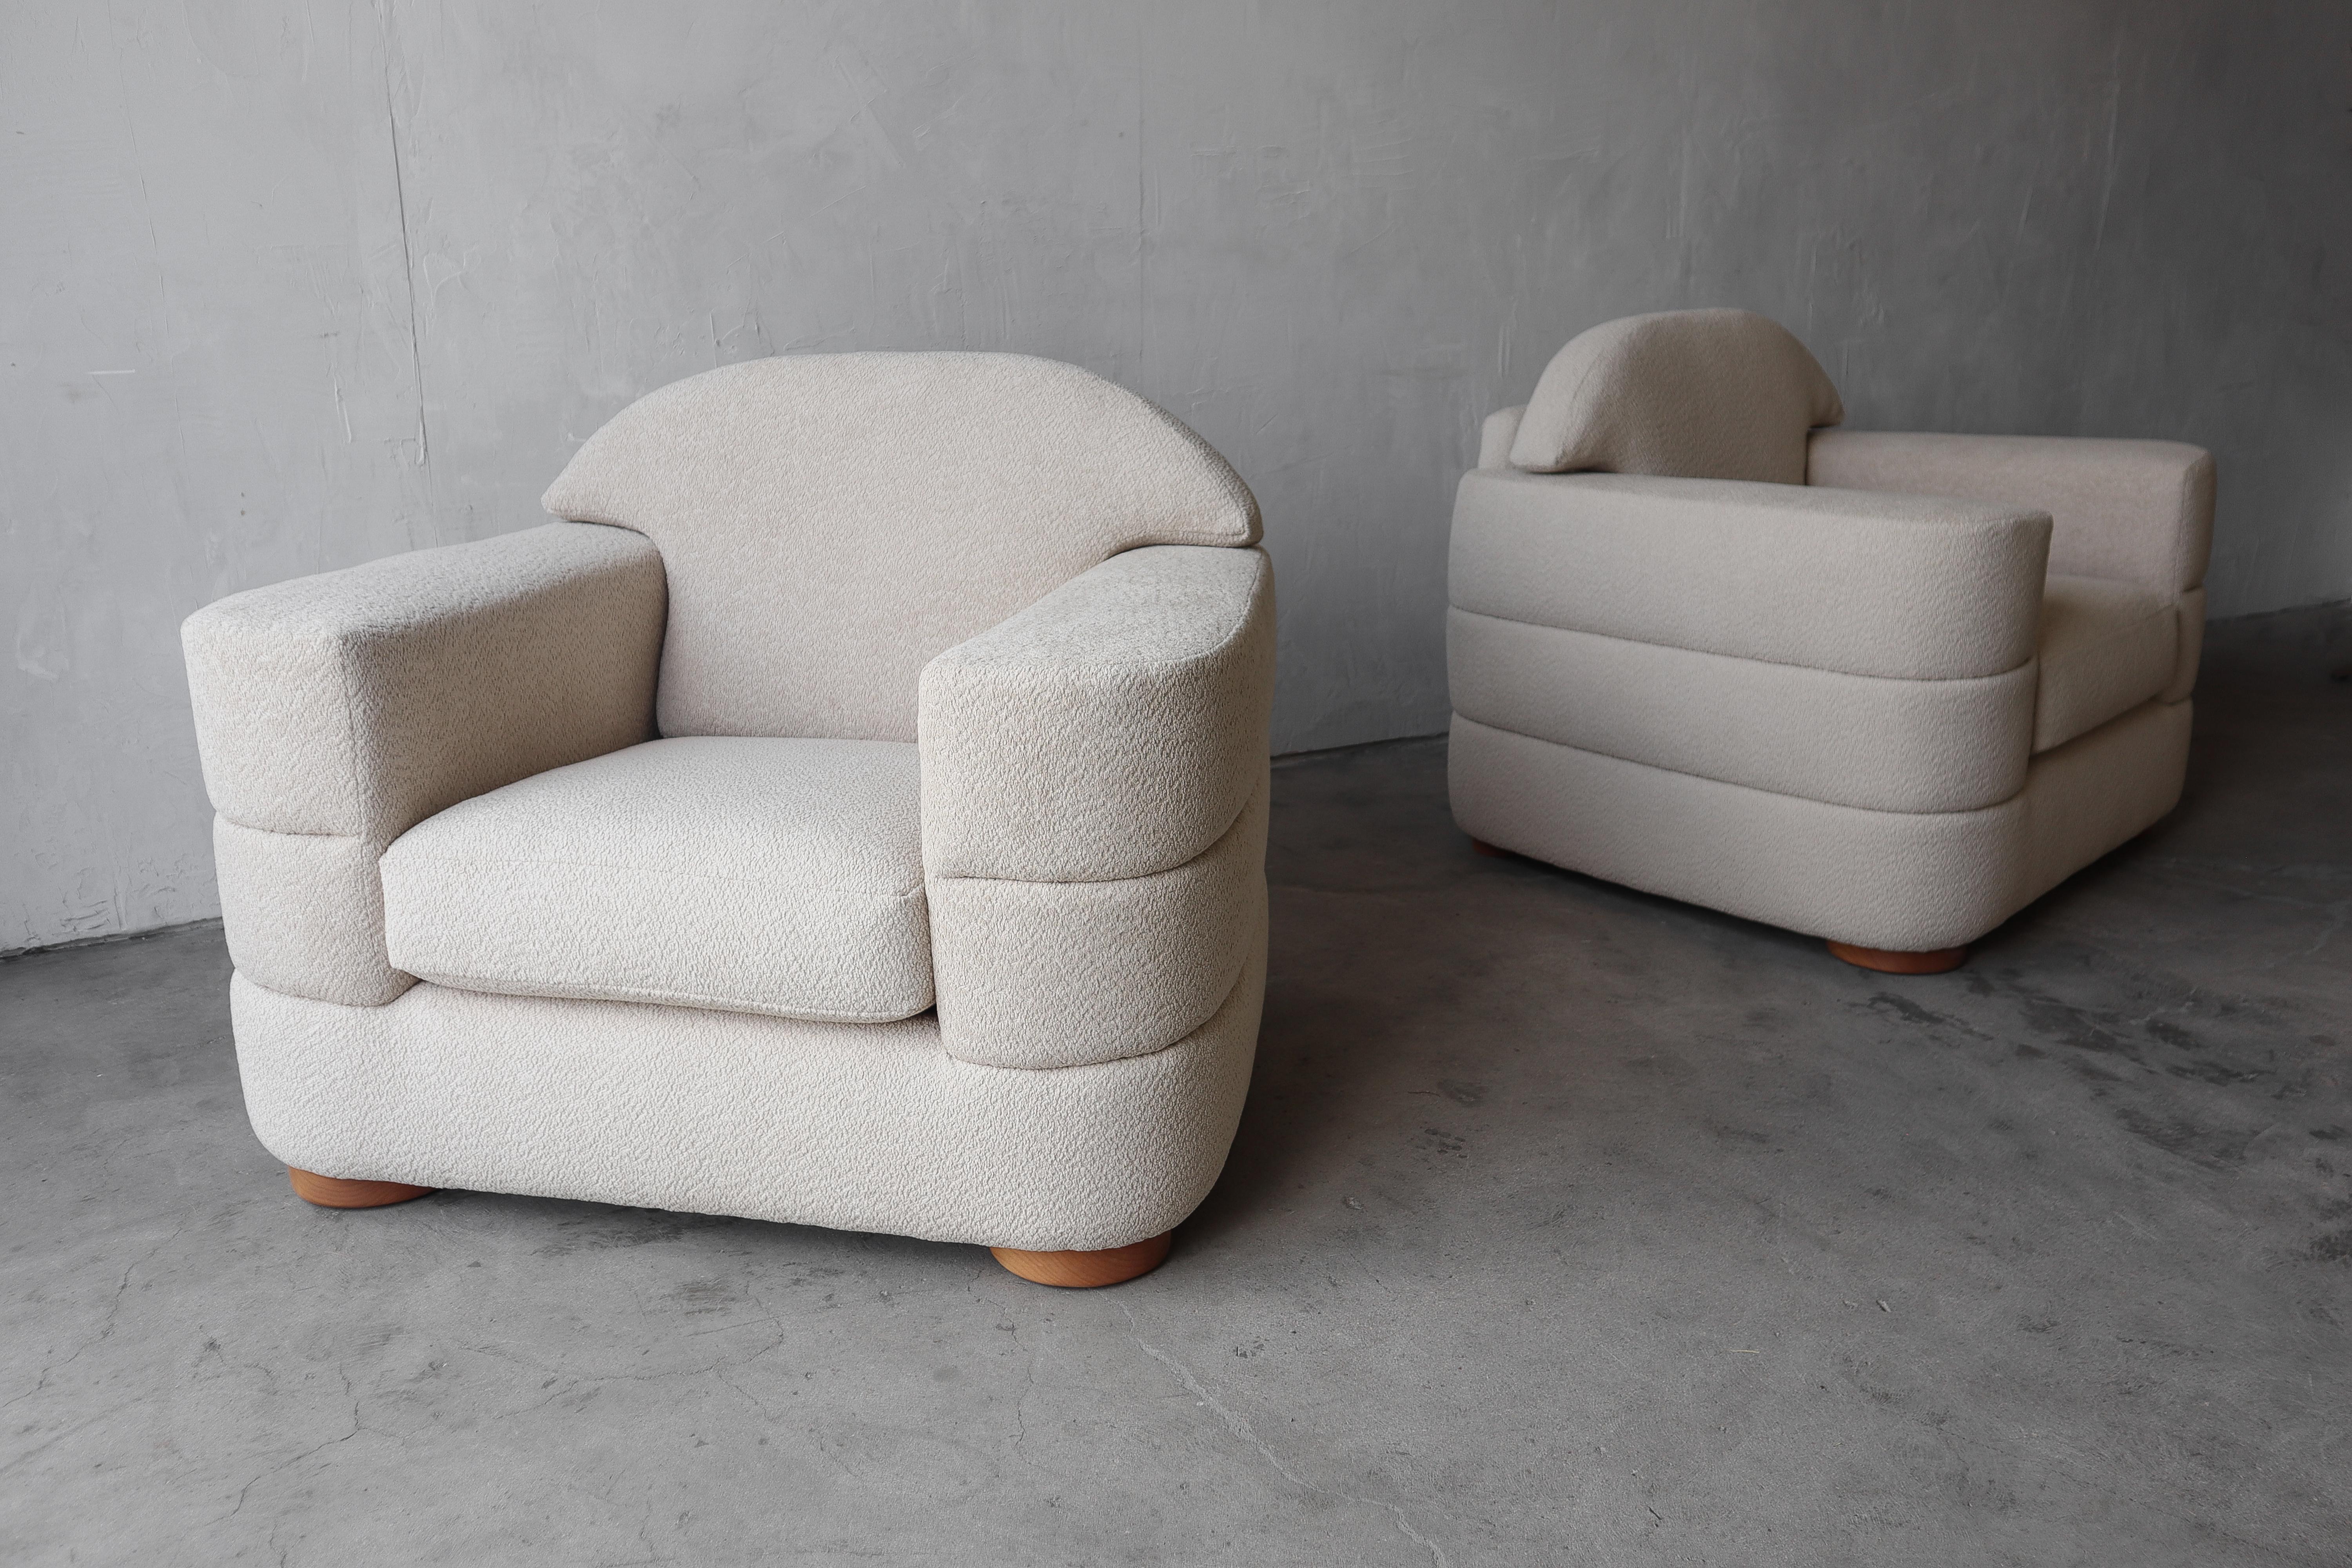 Oversized Pair of Channeled Lounge Chairs In Excellent Condition For Sale In Las Vegas, NV